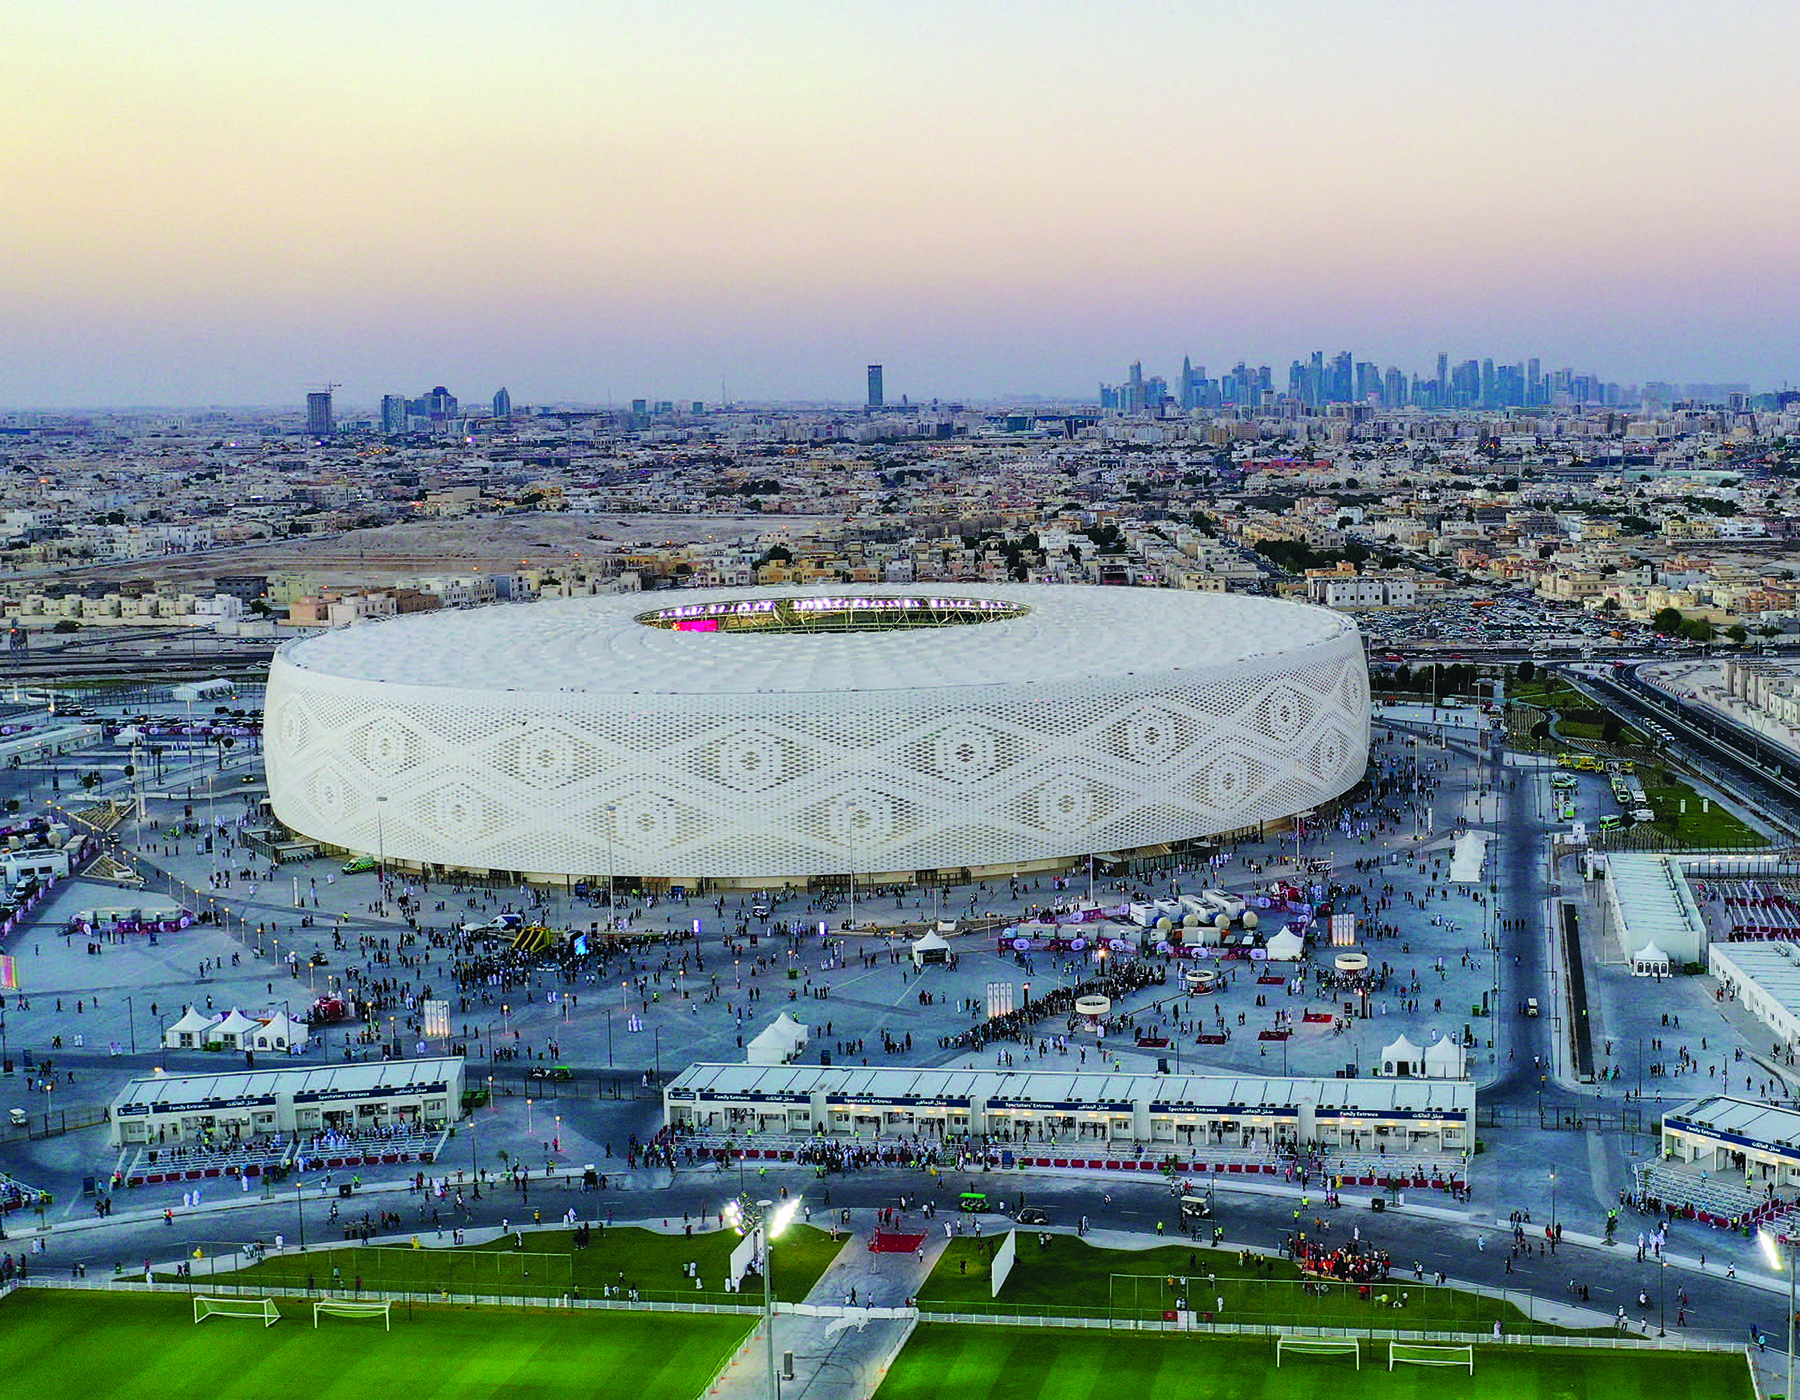 Al Thumama Stadium (Image courtesy of the Supreme Committee for Legacy and Delivery)